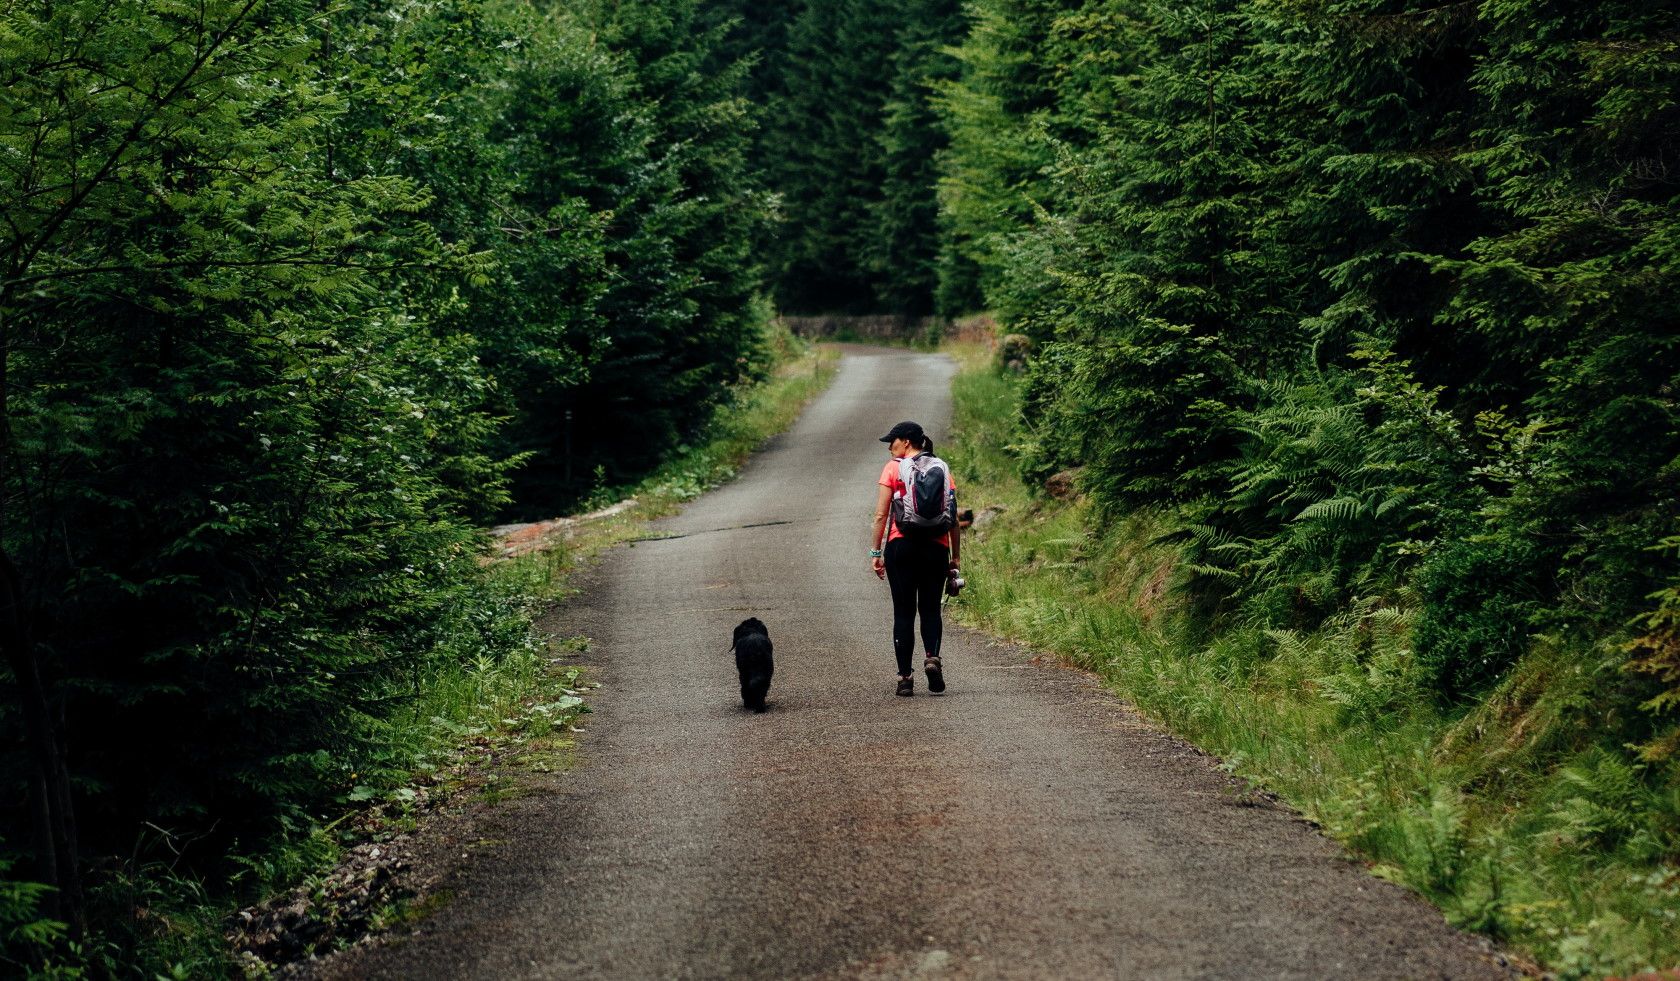 woman walking on road with dog in forest setting